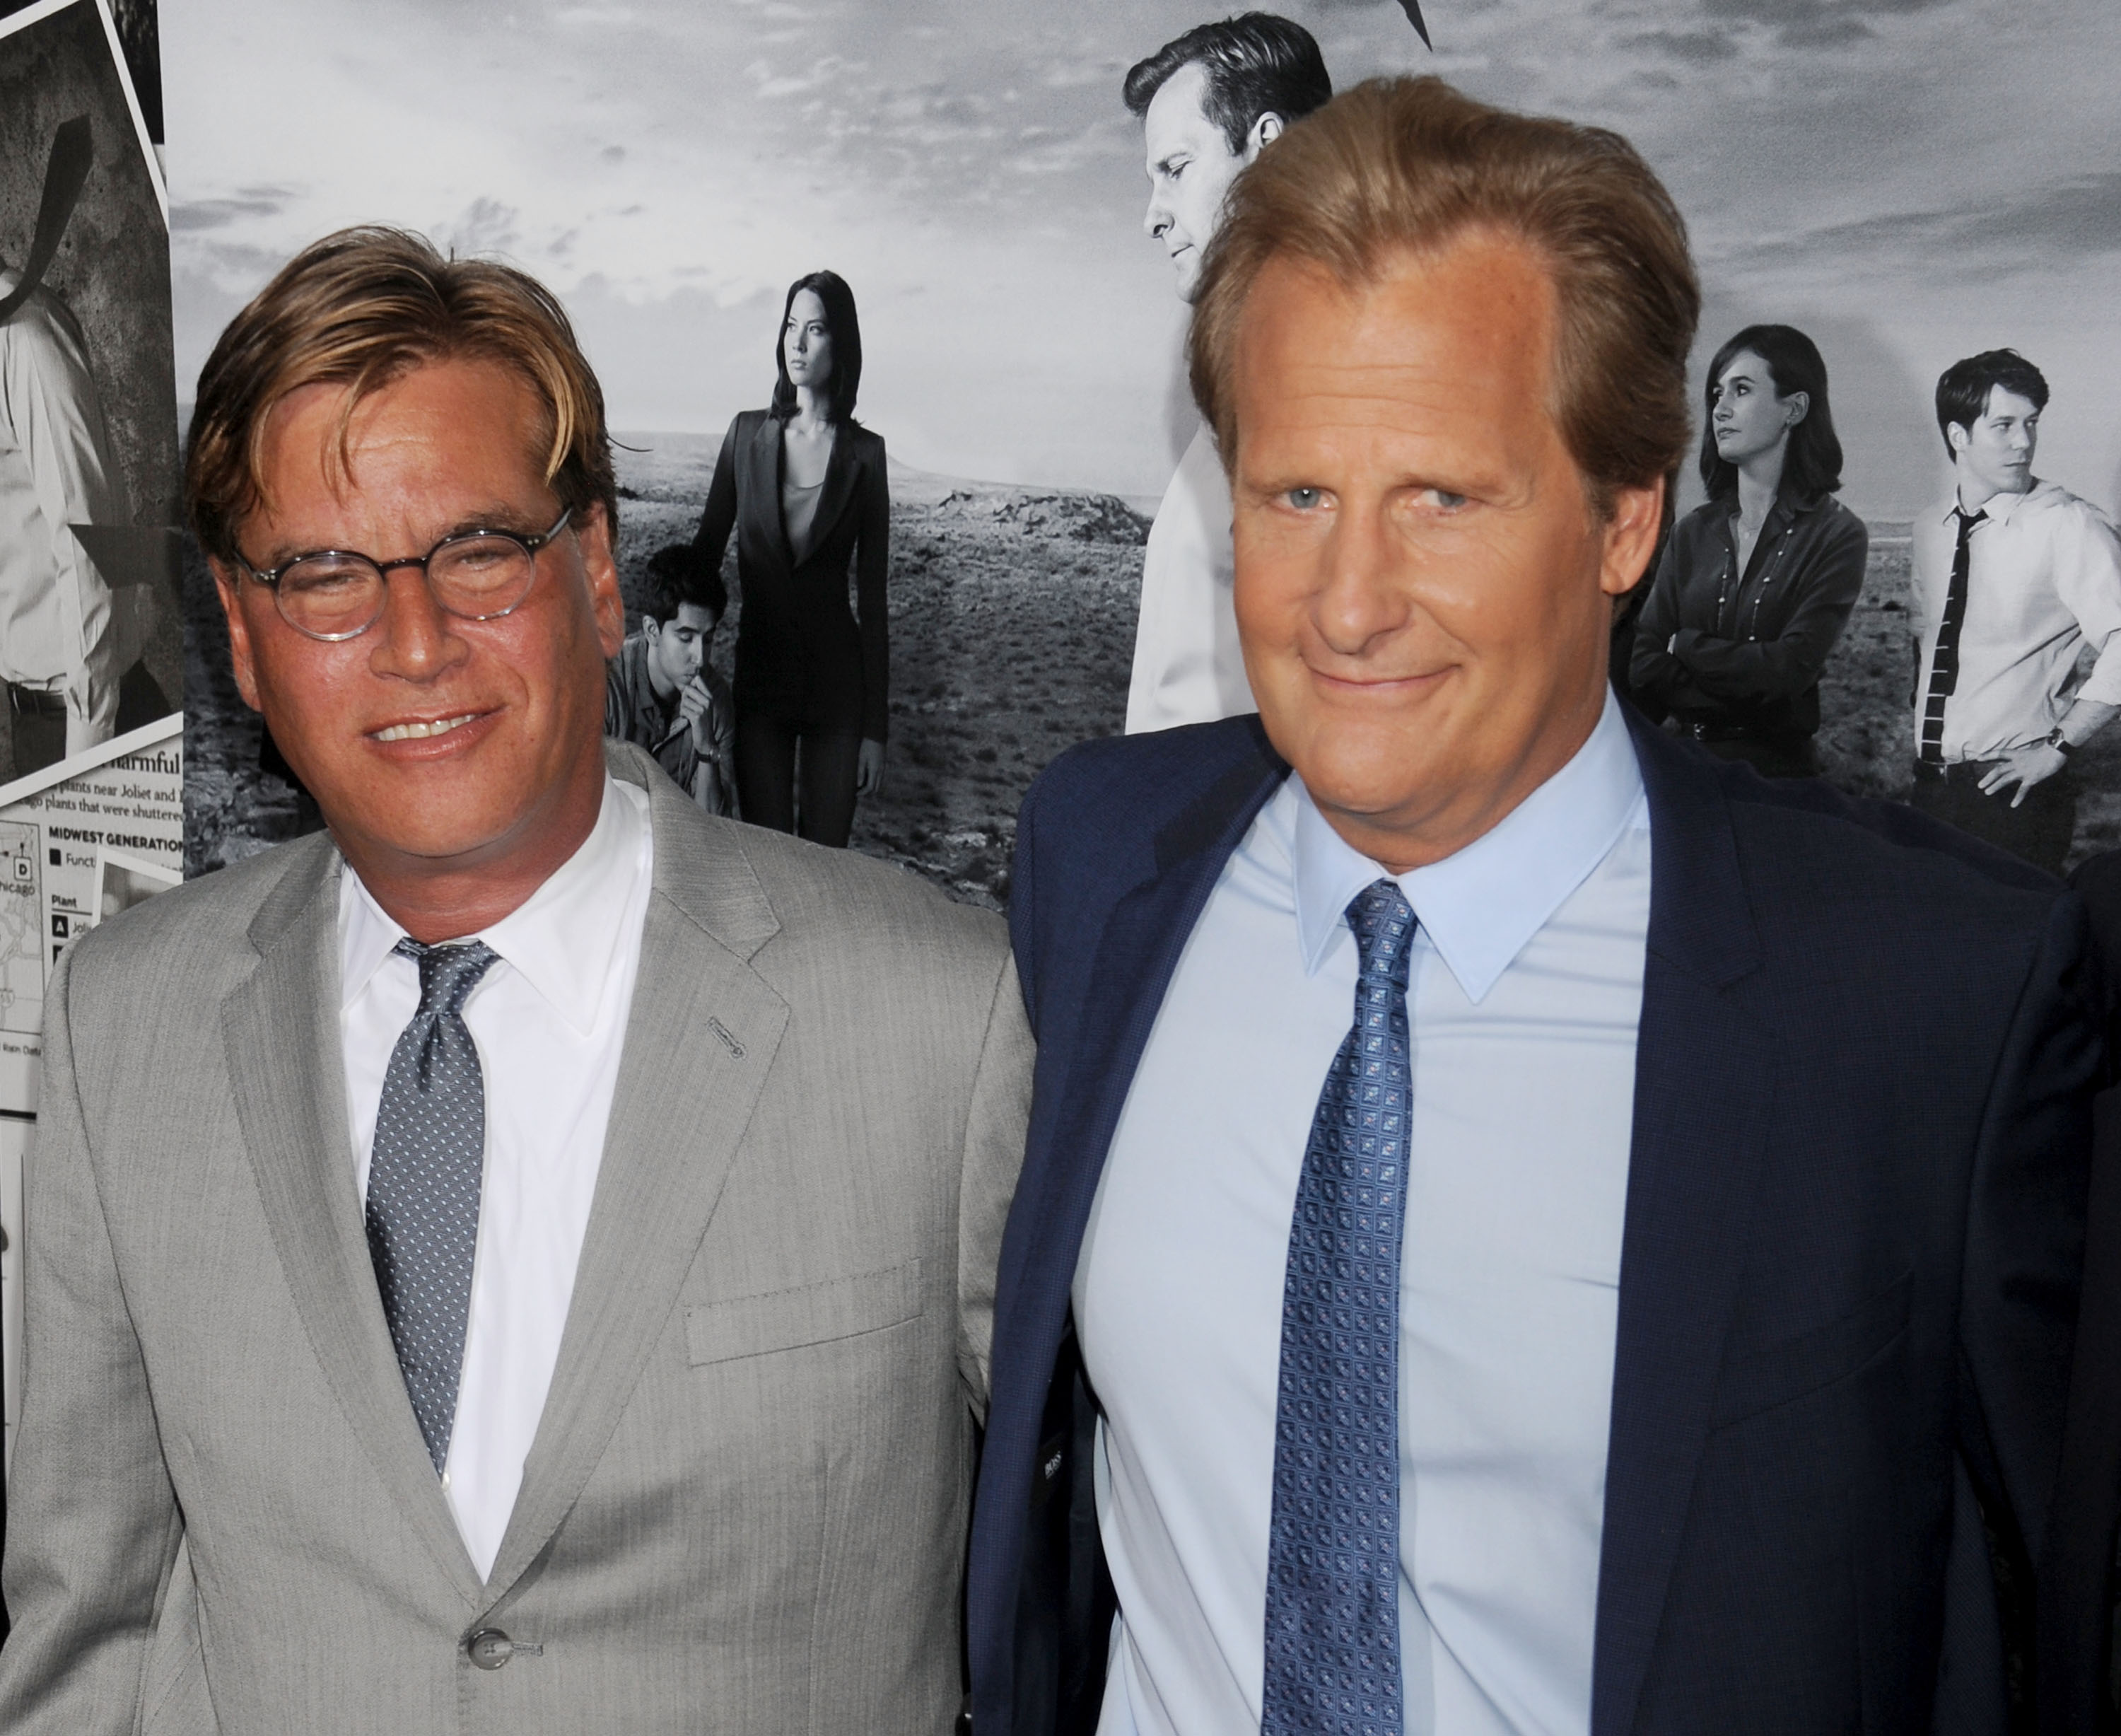 Aaron Sorkin and Jeff Daniels at the Los Angeles season 2 premiere of "The Newsroom" on July 10, 2013, in Hollywood, California. | Source: Gregg DeGuire/WireImage/Getty Images